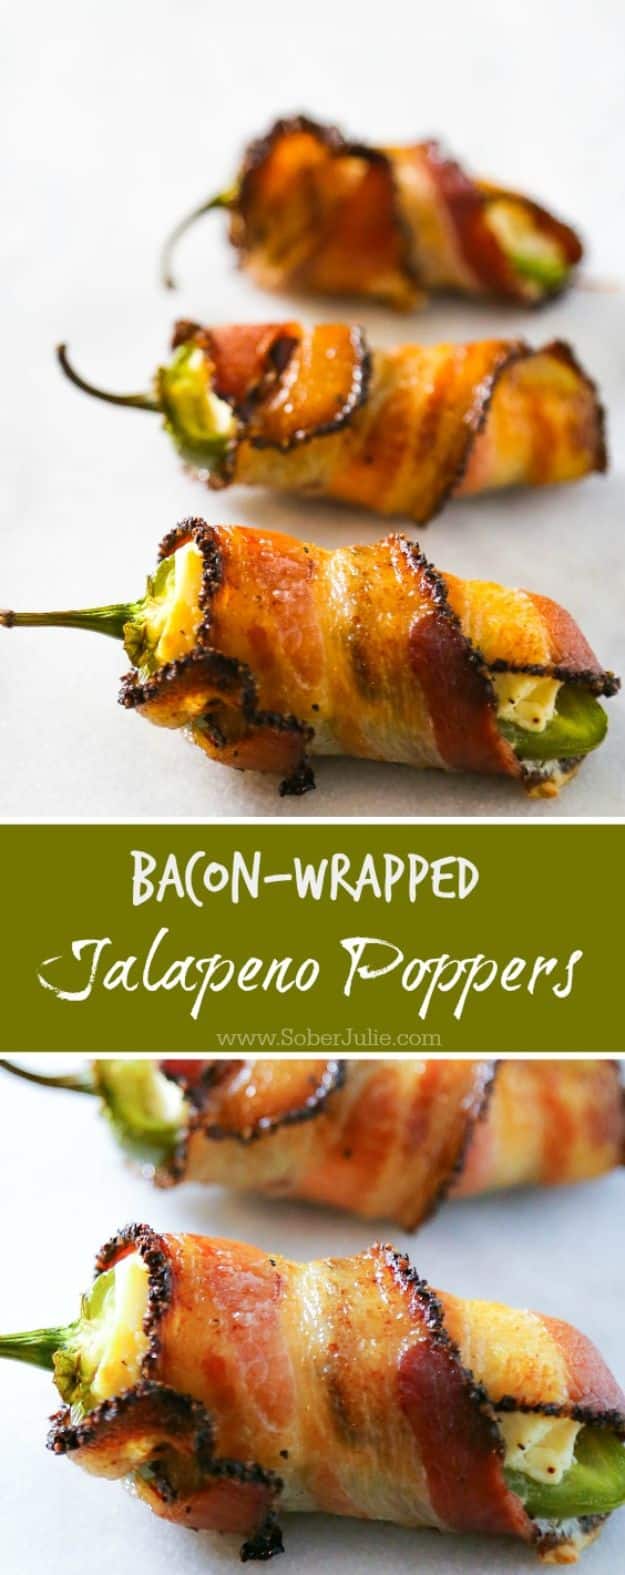 Best Mexican Food Recipes - Bacon Wrapped Jalapeno Popper – Homemade Authentic Mexican Version - Mexican Beef Soup - Authentic Mexican Foods and Recipe Ideas for Casseroles, Quesadillas, Tacos, Appetizers, Tamales, Enchiladas, Crockpot, Chicken, Beef and Healthy Foods - Desserts and  dessert#recipes #mexican